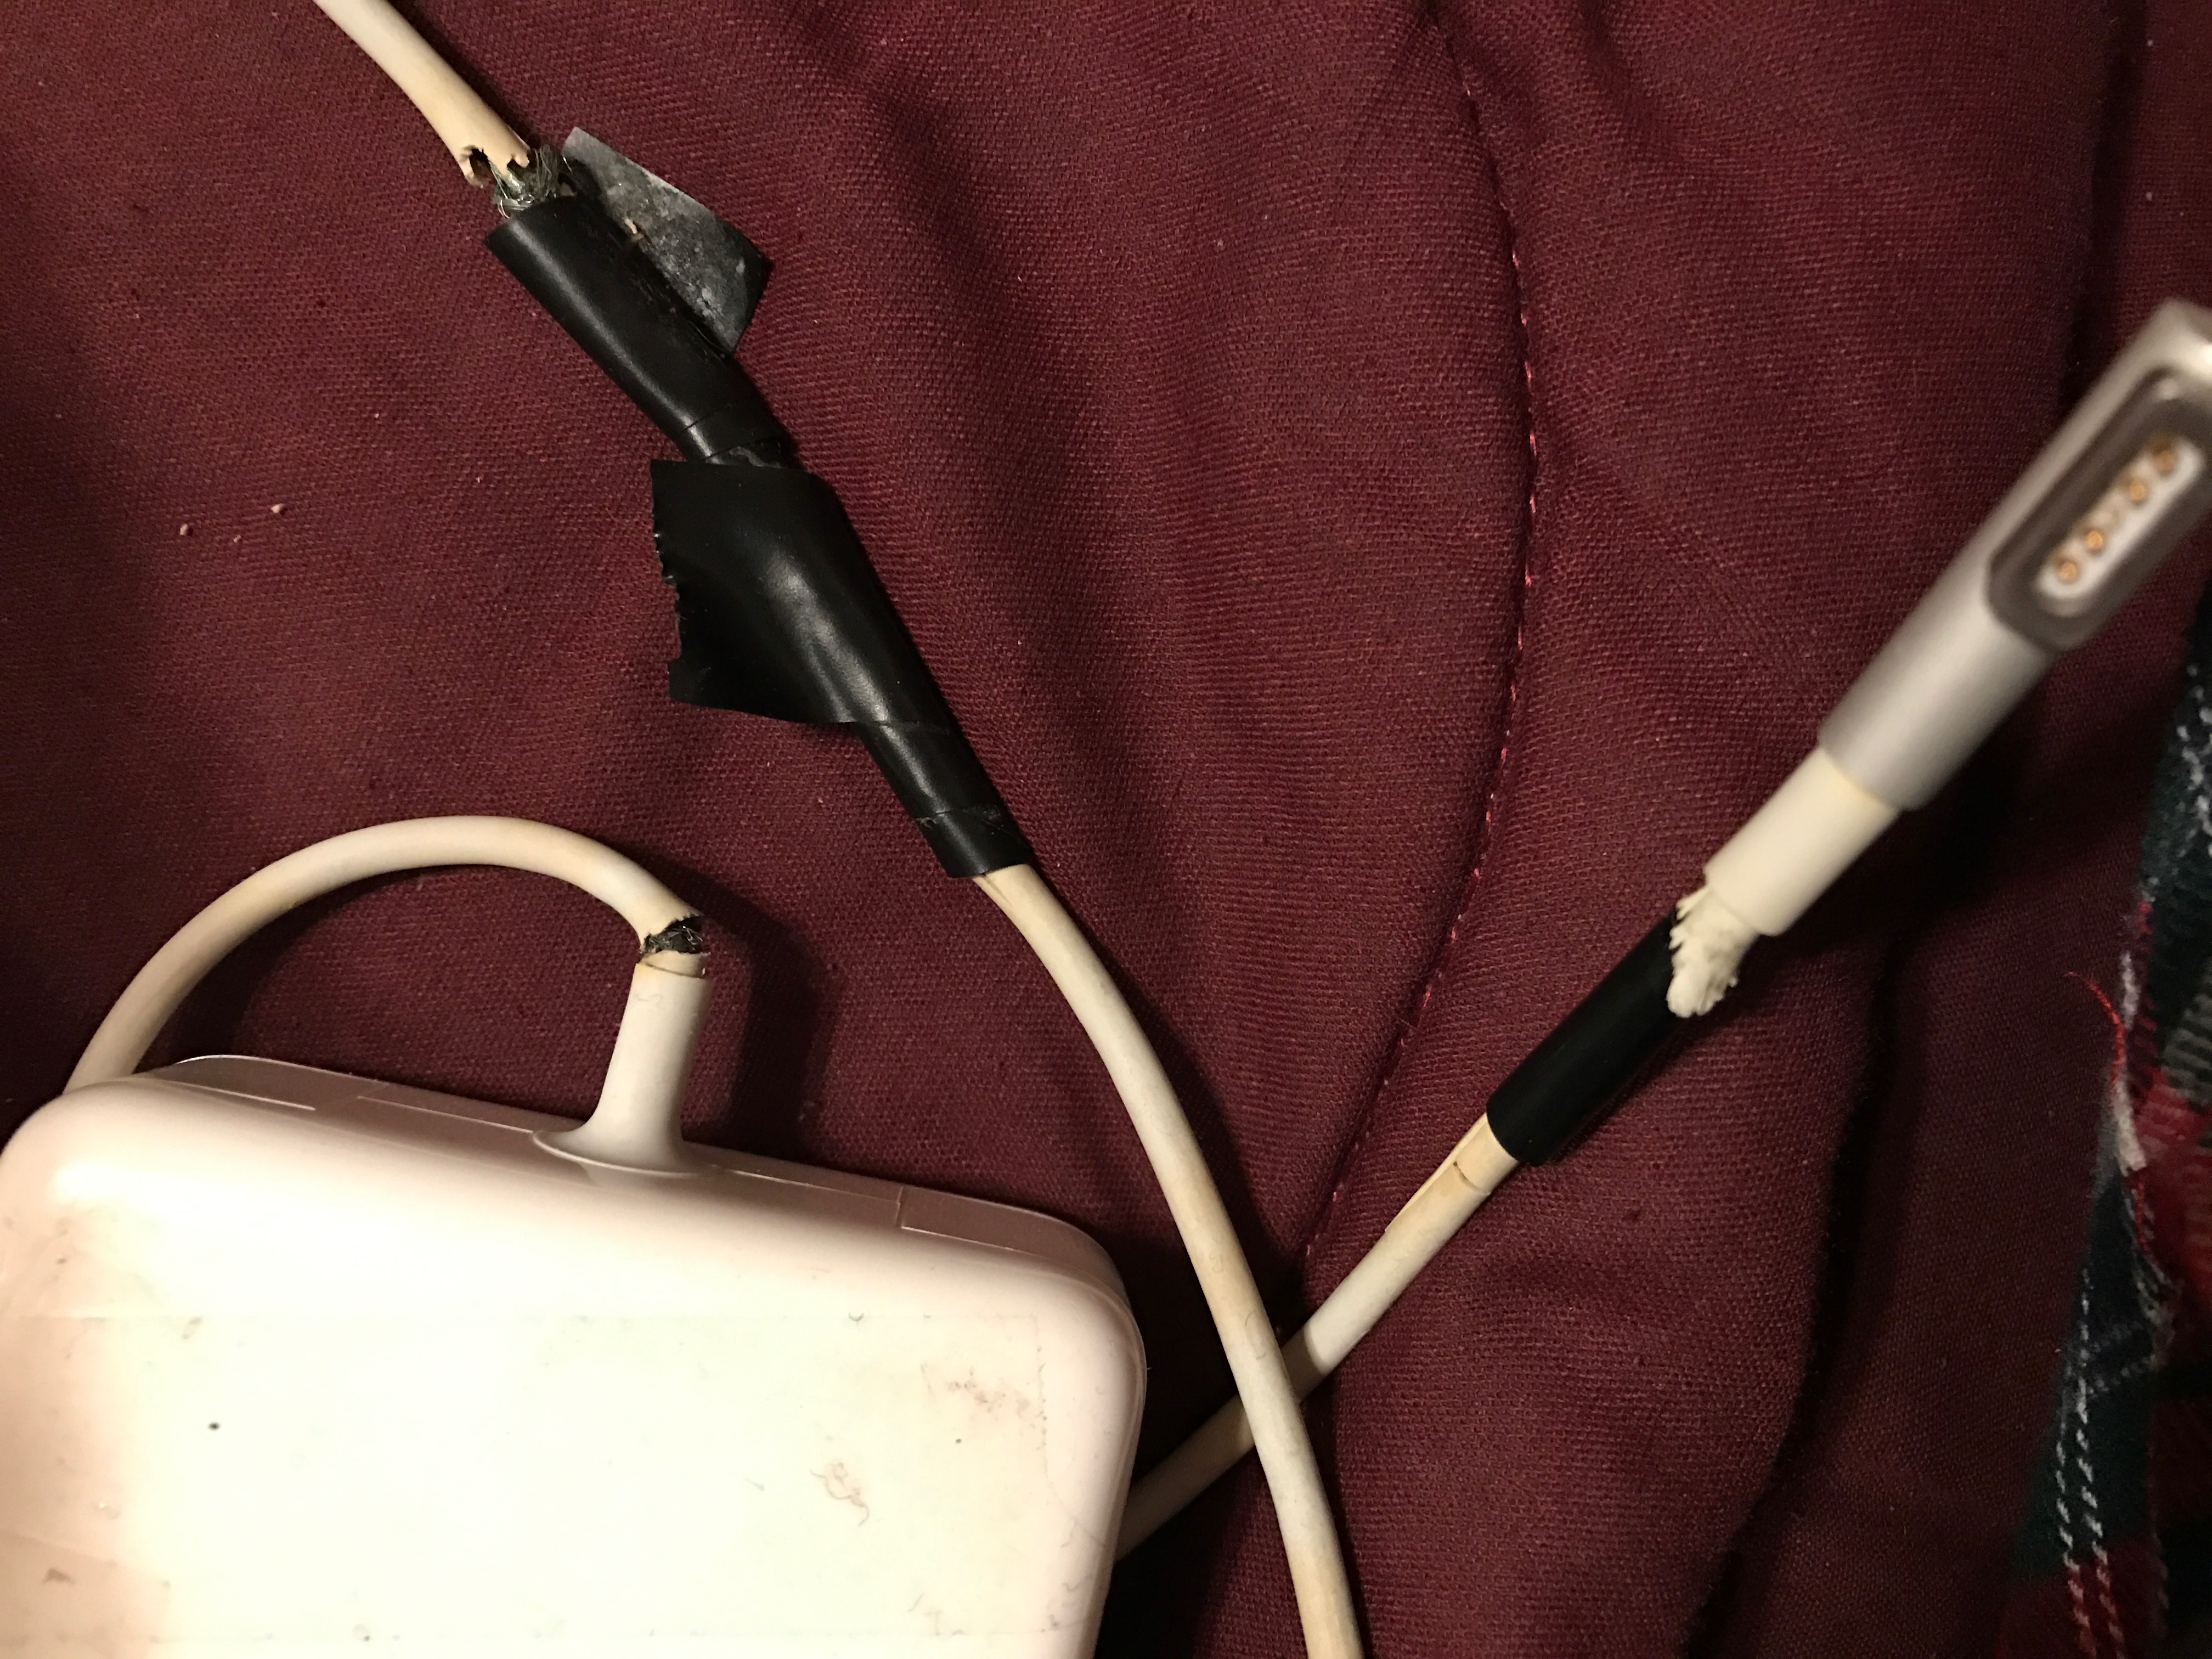 2010 MBP Broken Charging Cable